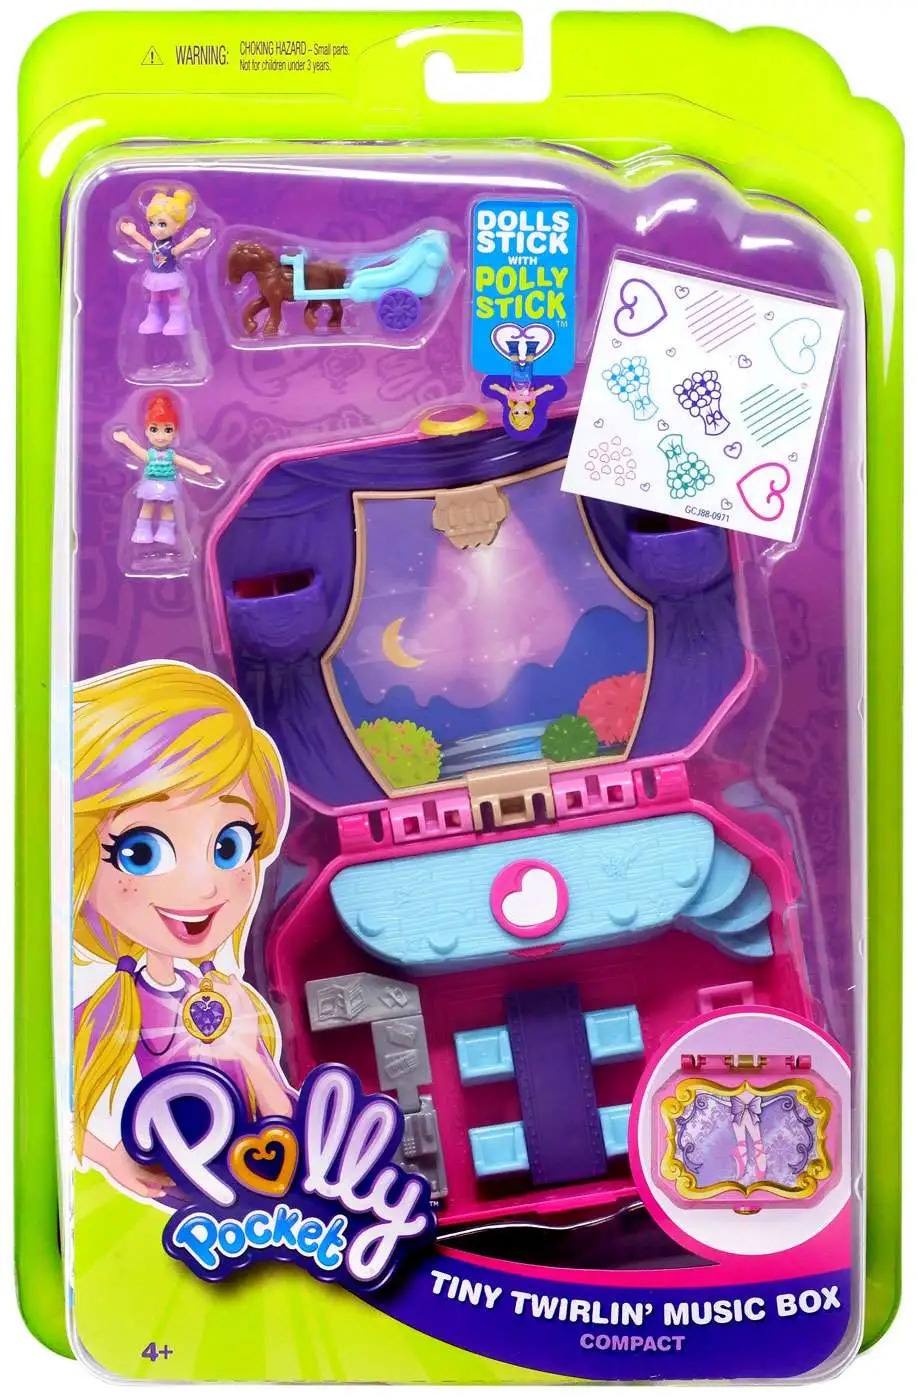 Gift Polly Pocket Tiny Places Fiercely Fab Studio Compact Mattel Toy Play Set 